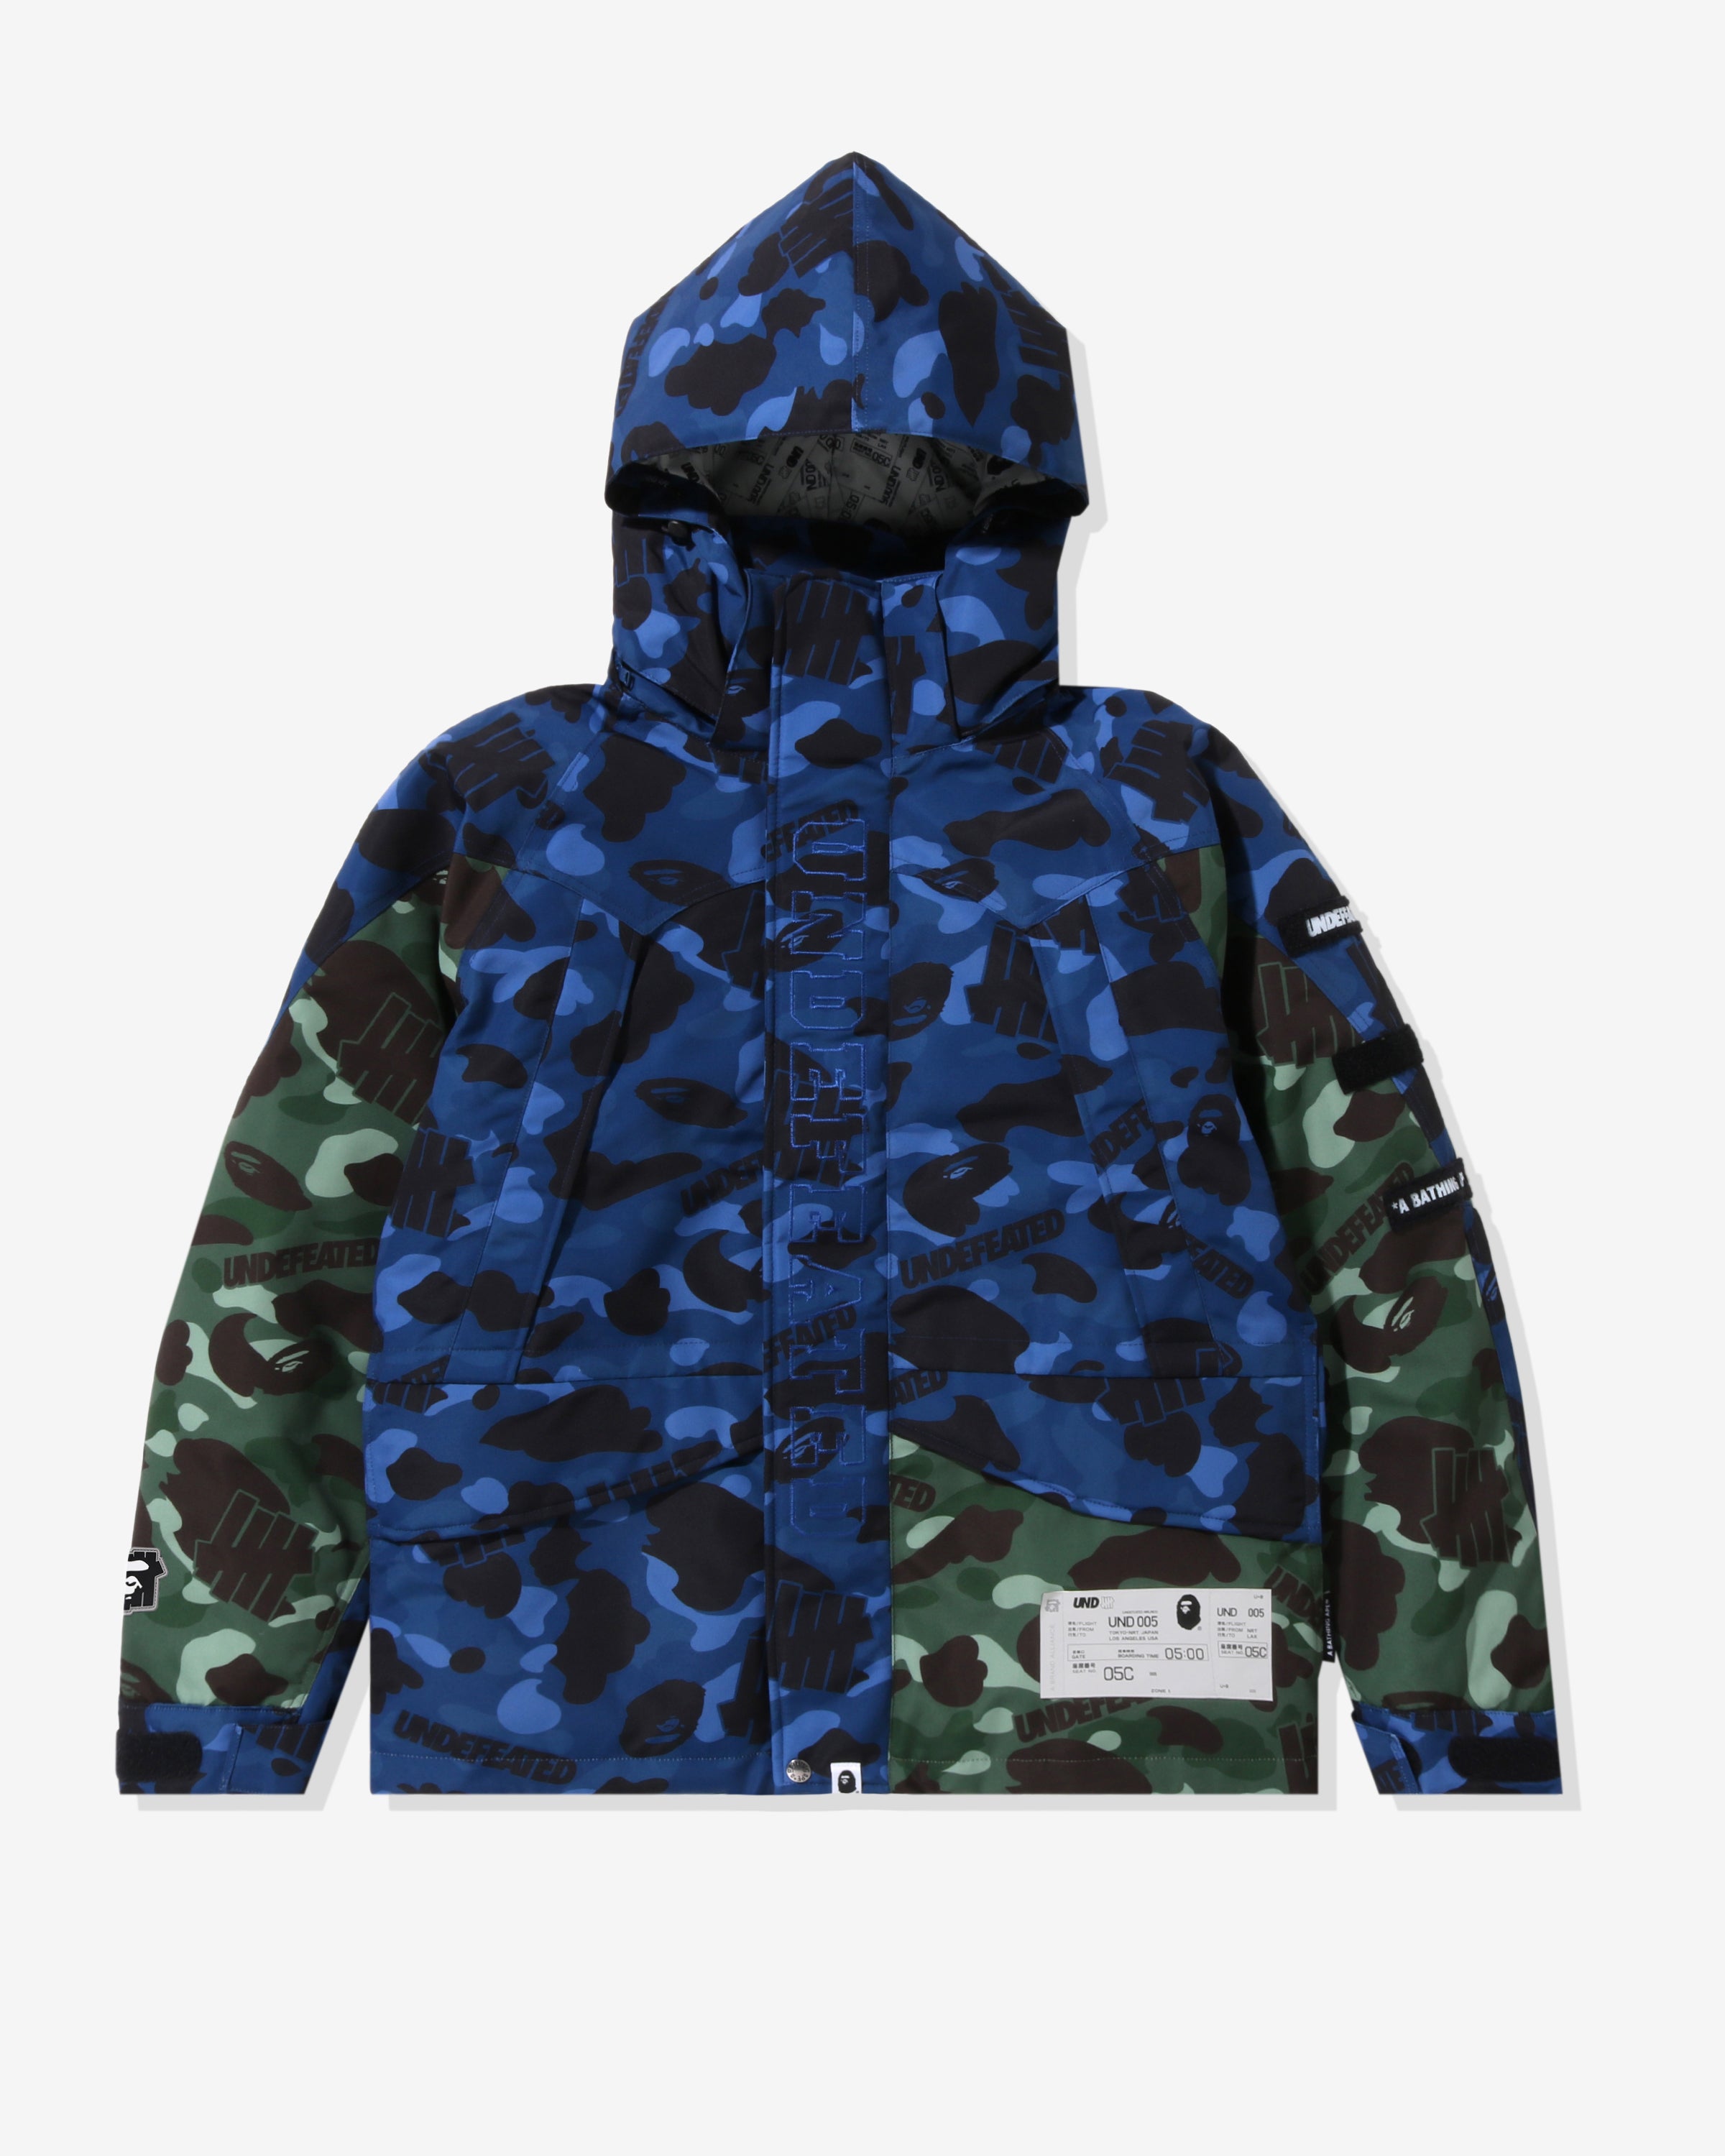 BAPE X UNDEFEATED COLOR CAMO SNOWBOARD JACKET   NAVY – Undefeated